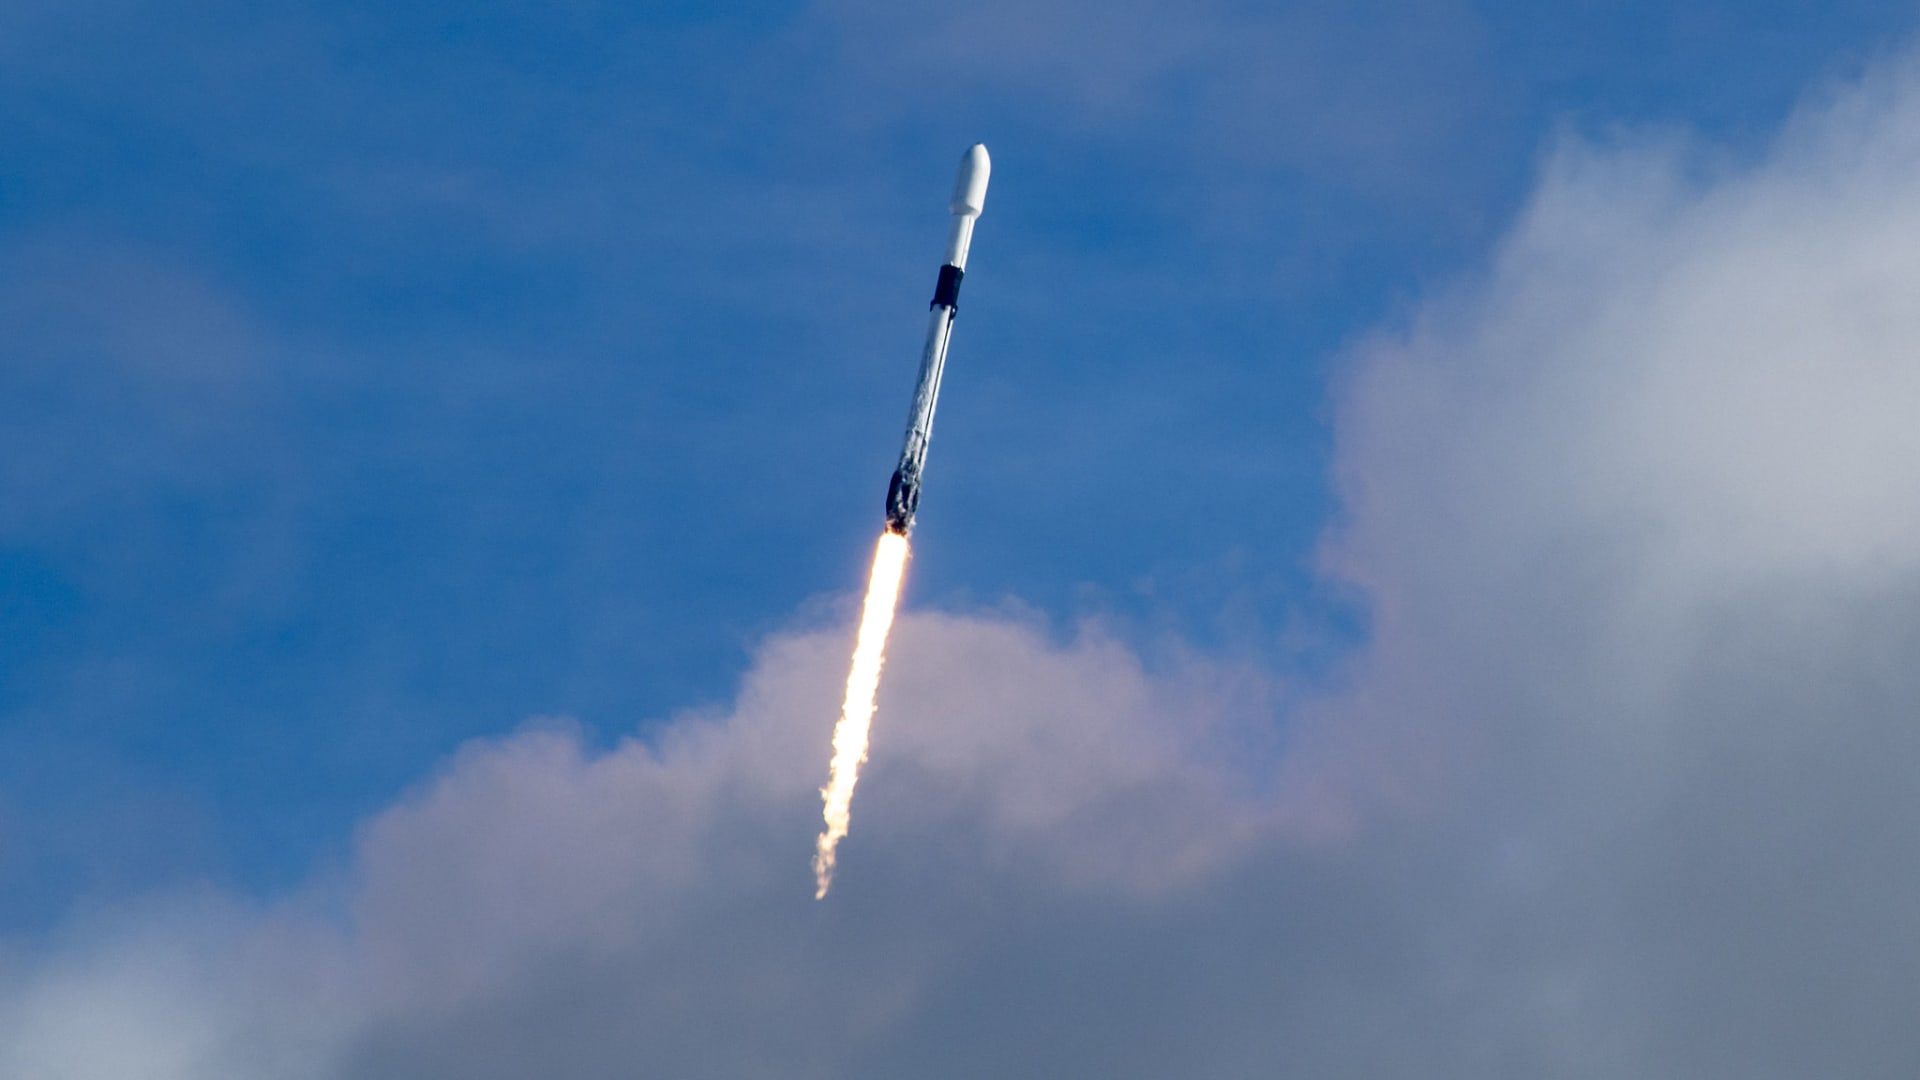 A Falcon 9 rocket launches the Transporter-1 mission in January 2021.